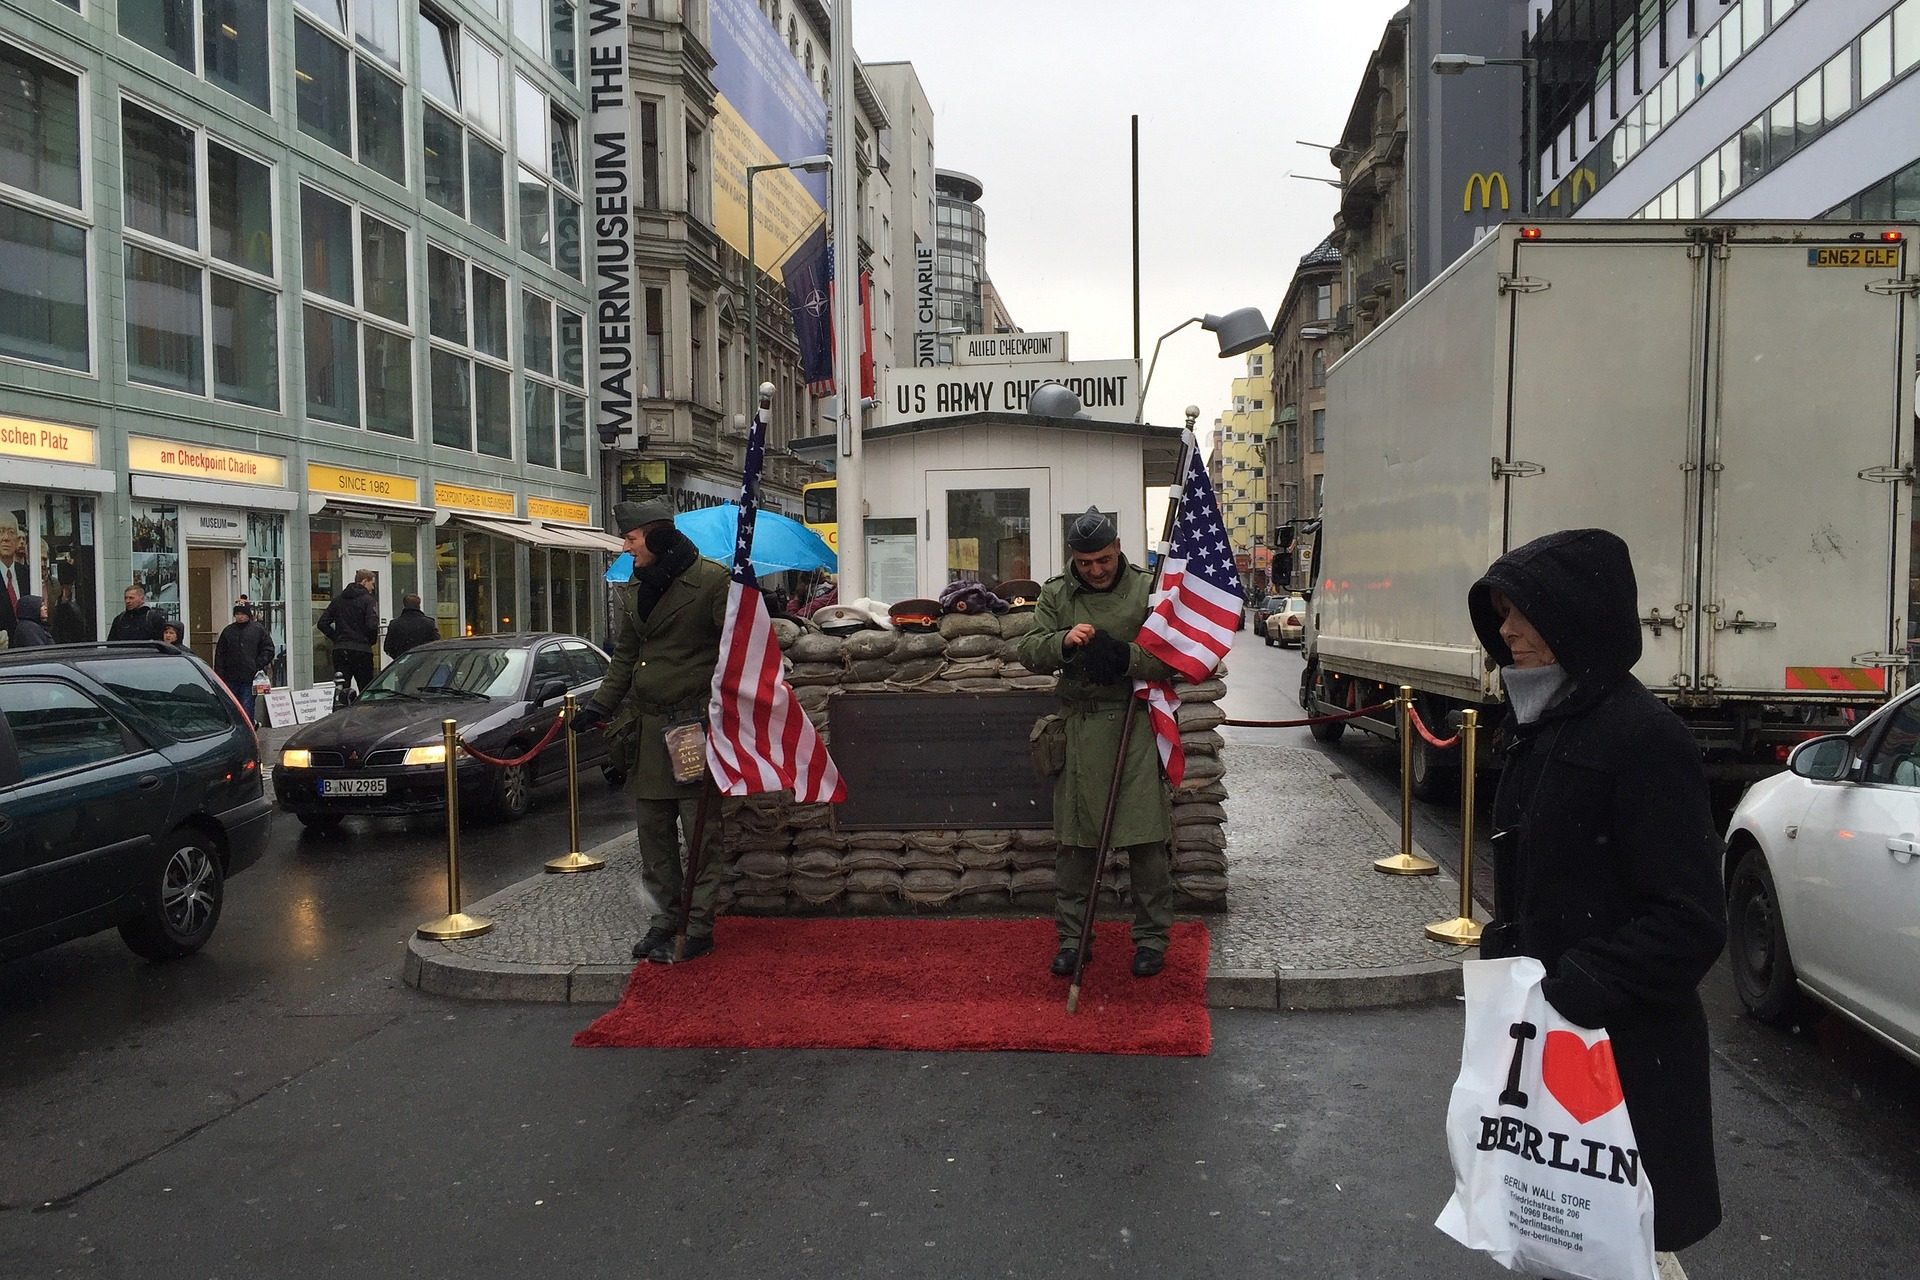 7. Checkpoint Charlie in Berlin